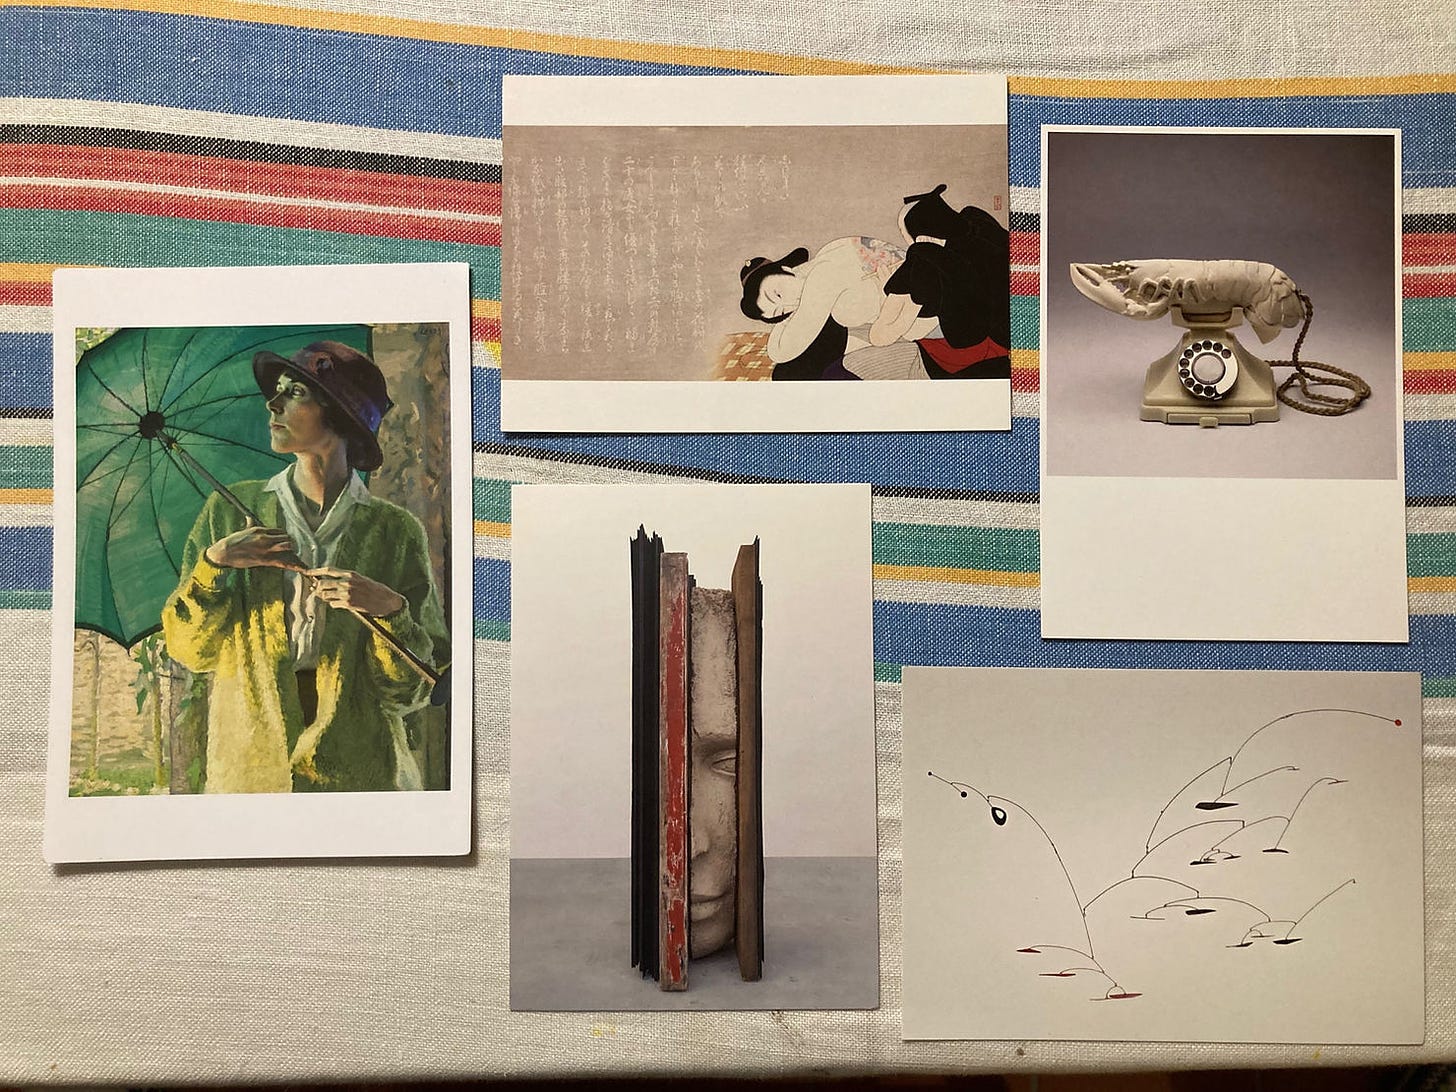 Clockwise, starting with the lady in green: William John Leech, the Sunshade, c. 1913 (From the National Gallery Ireland, in Dublin, which I visited just after the Zen retreat)  Komura Settai, Tattoo artist at work, 1938  Salvador Dalí, White aphrodisiac telephone, 1936  Alexander Calder, Suspended Composition of Small Leaves (Four Red Spots), 1947  Mark Manders, Large Composition with Red, 2017